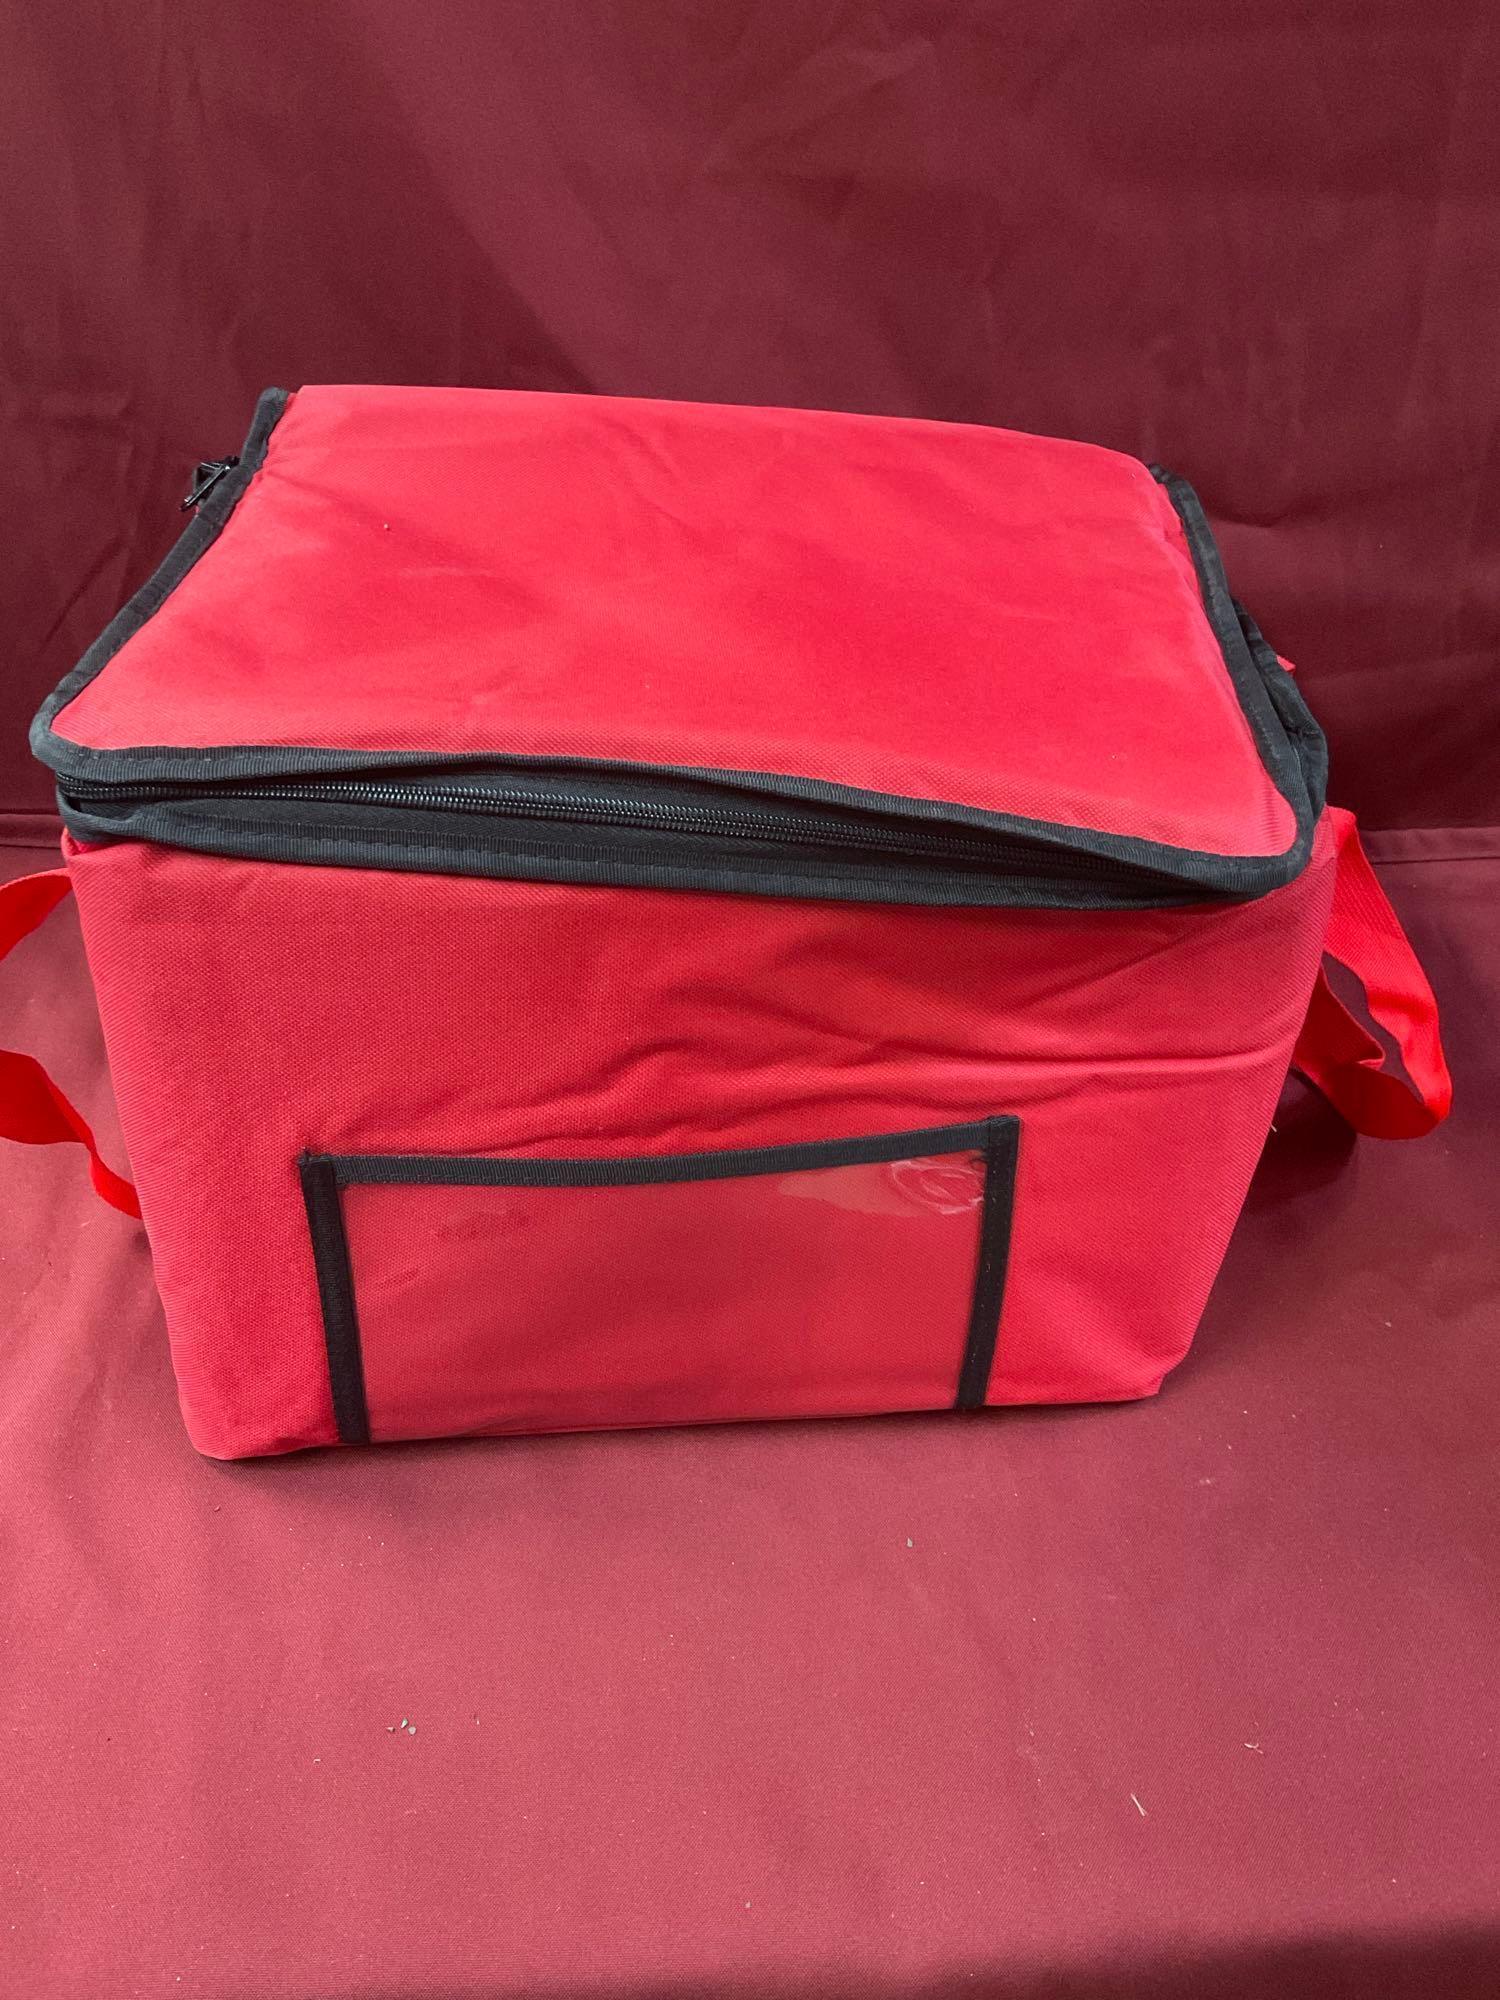 Large hot & cold delivery bag, red, 2 pieces.